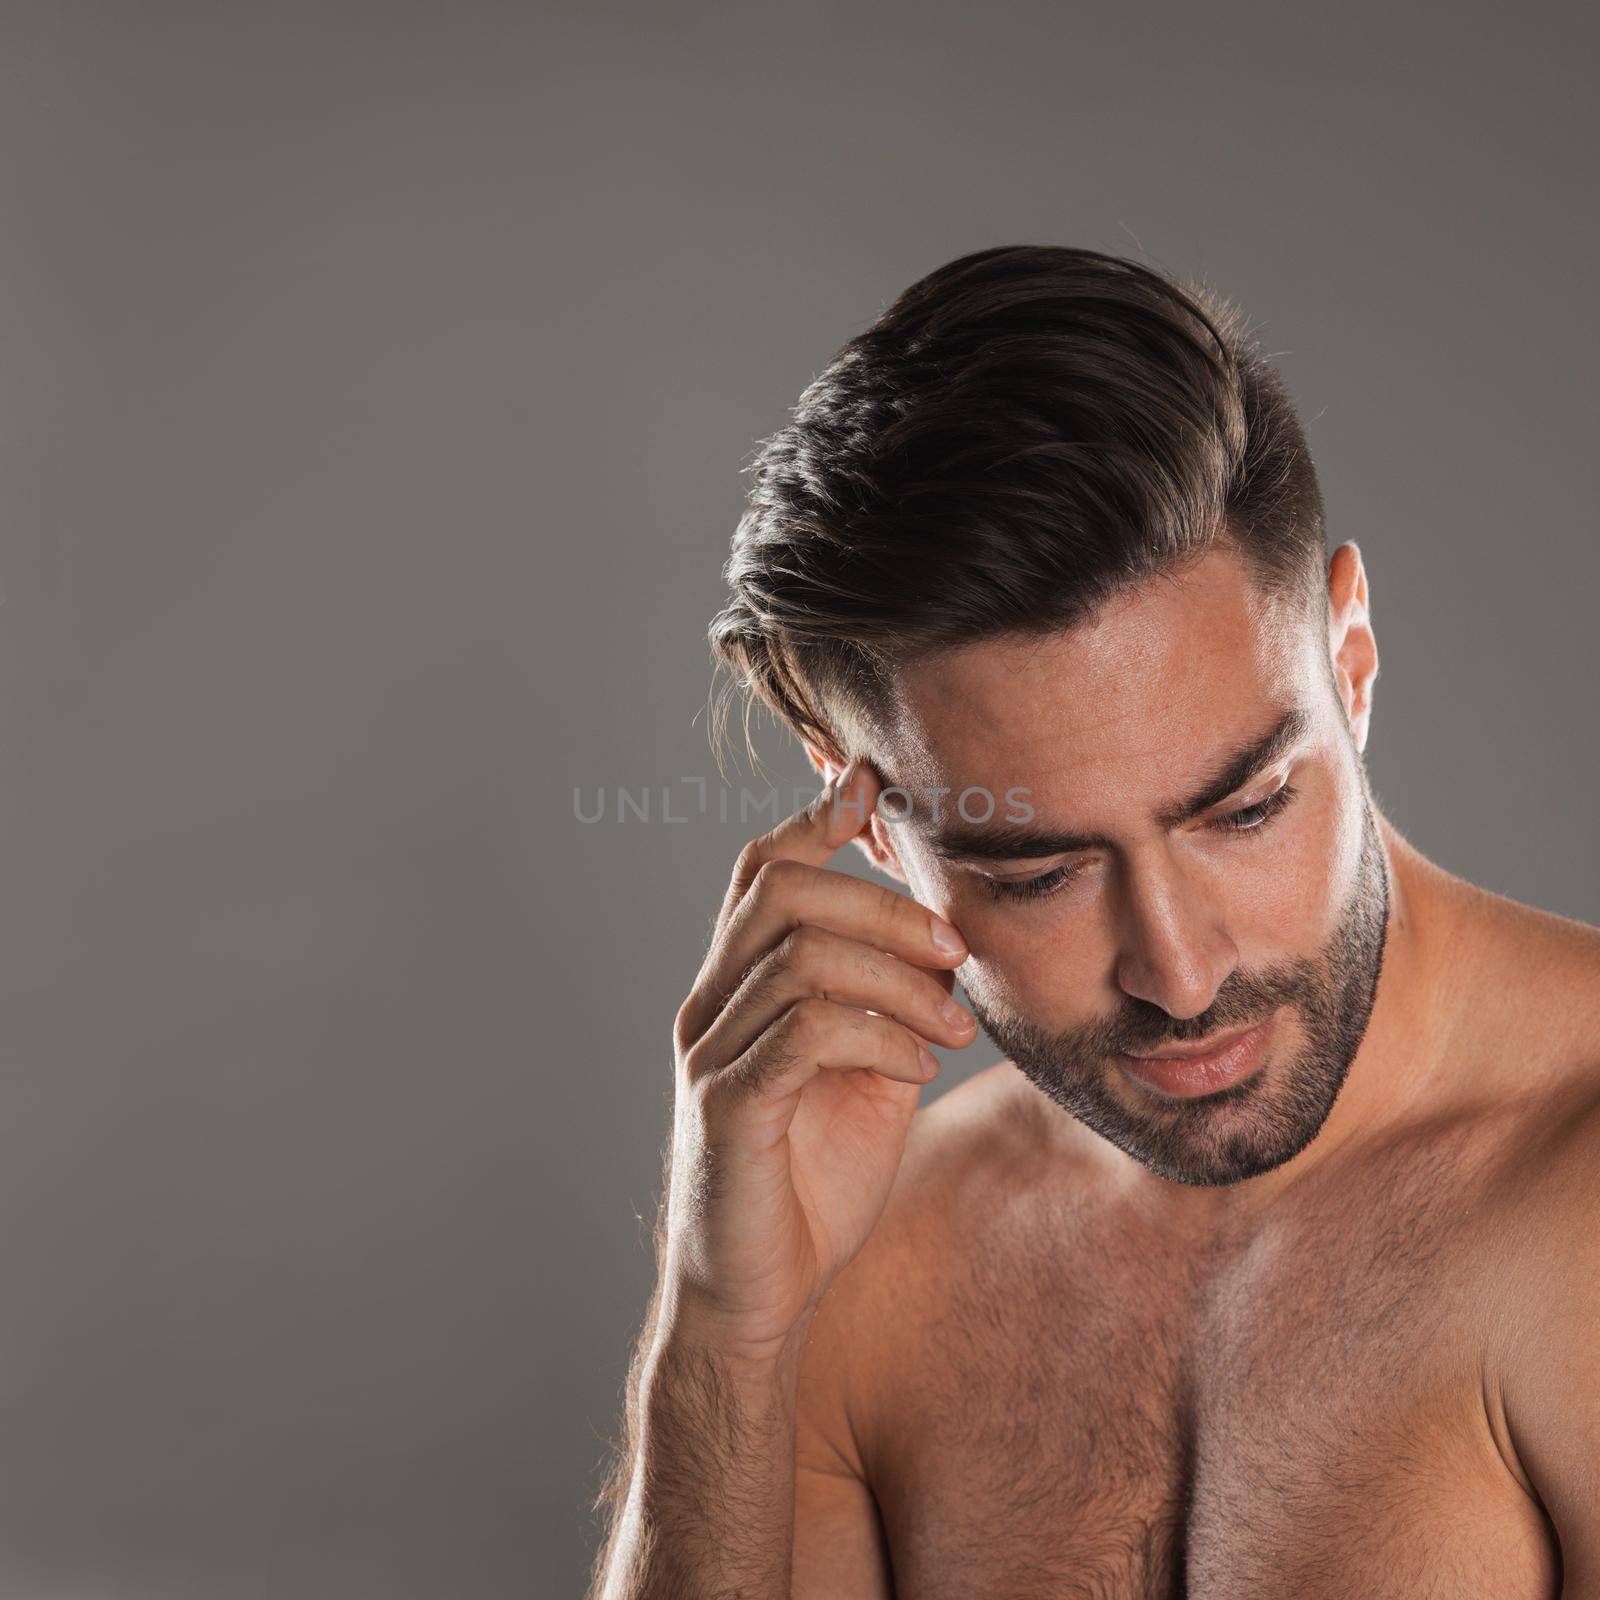 Photo of thoughtful half-naked man posing and looking aside over gray background with copy space